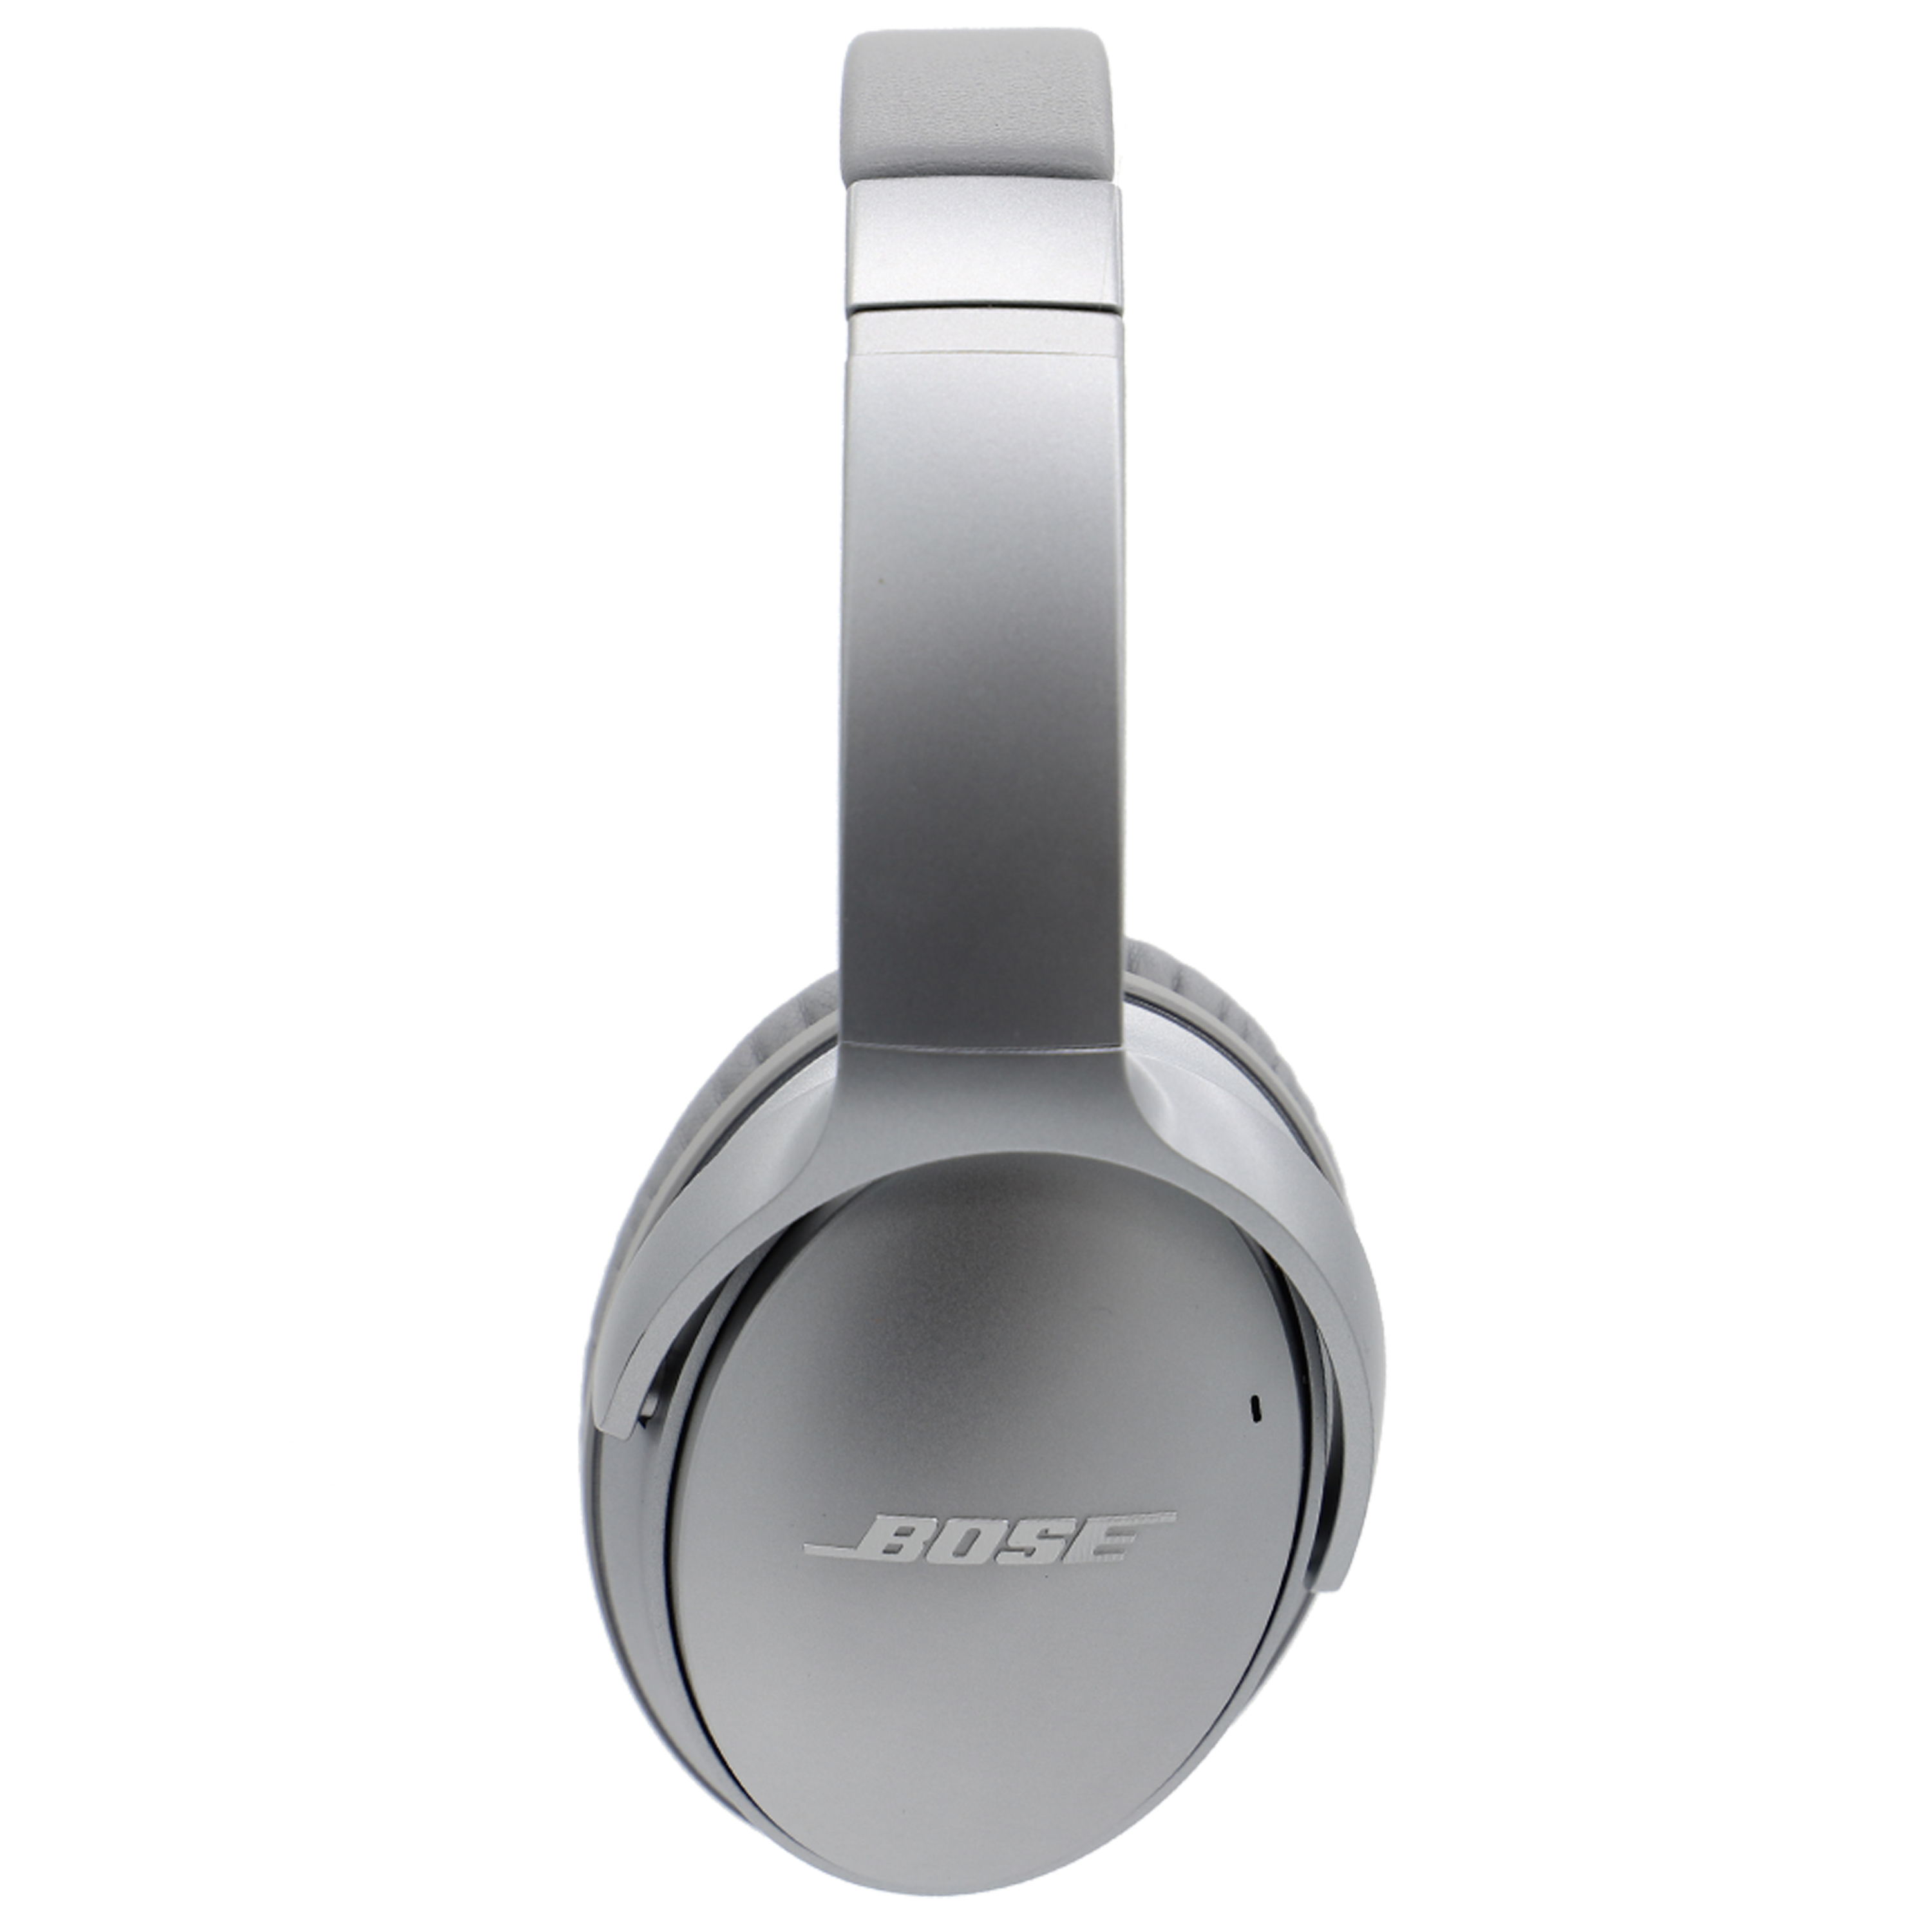 Rent Bose Quietcomfort 35 II Noise-cancelling Over-ear Bluetooth Headphones  from $12.90 per month